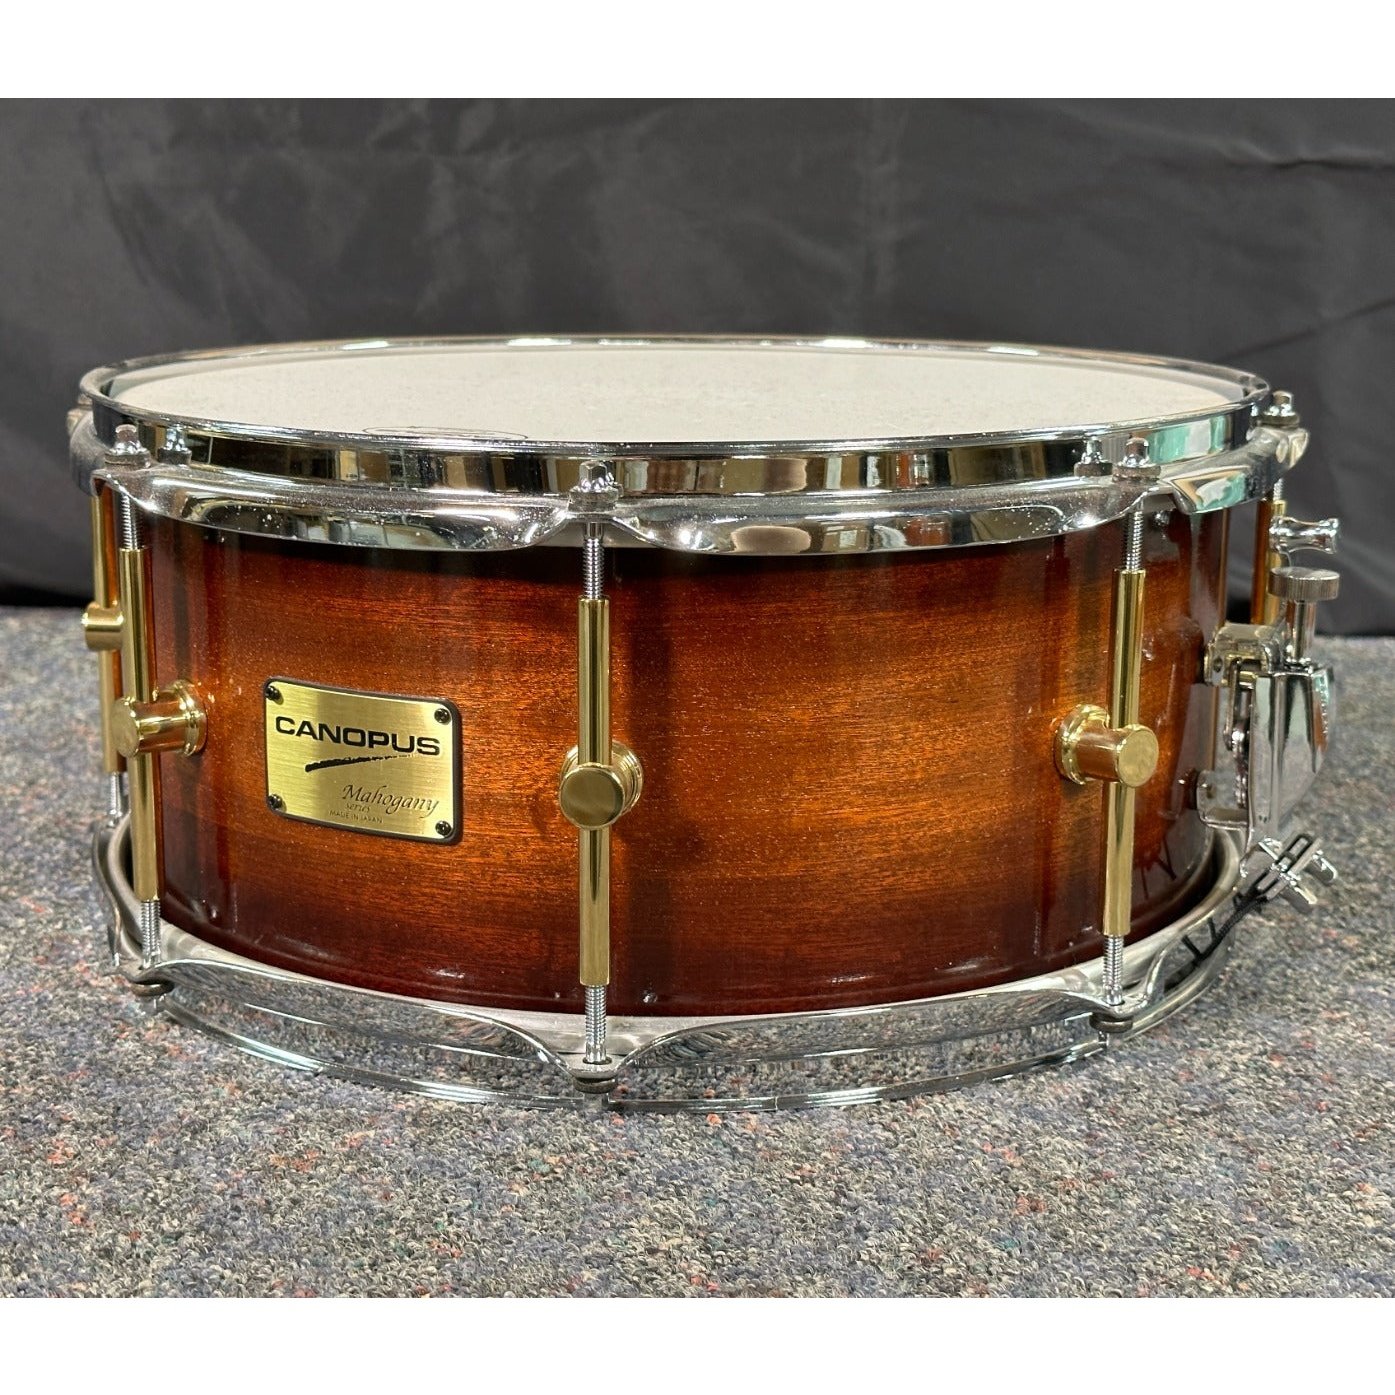 Canopus Mahogany Snare Drum 14x7 Brown Burst Lacquer w/Single